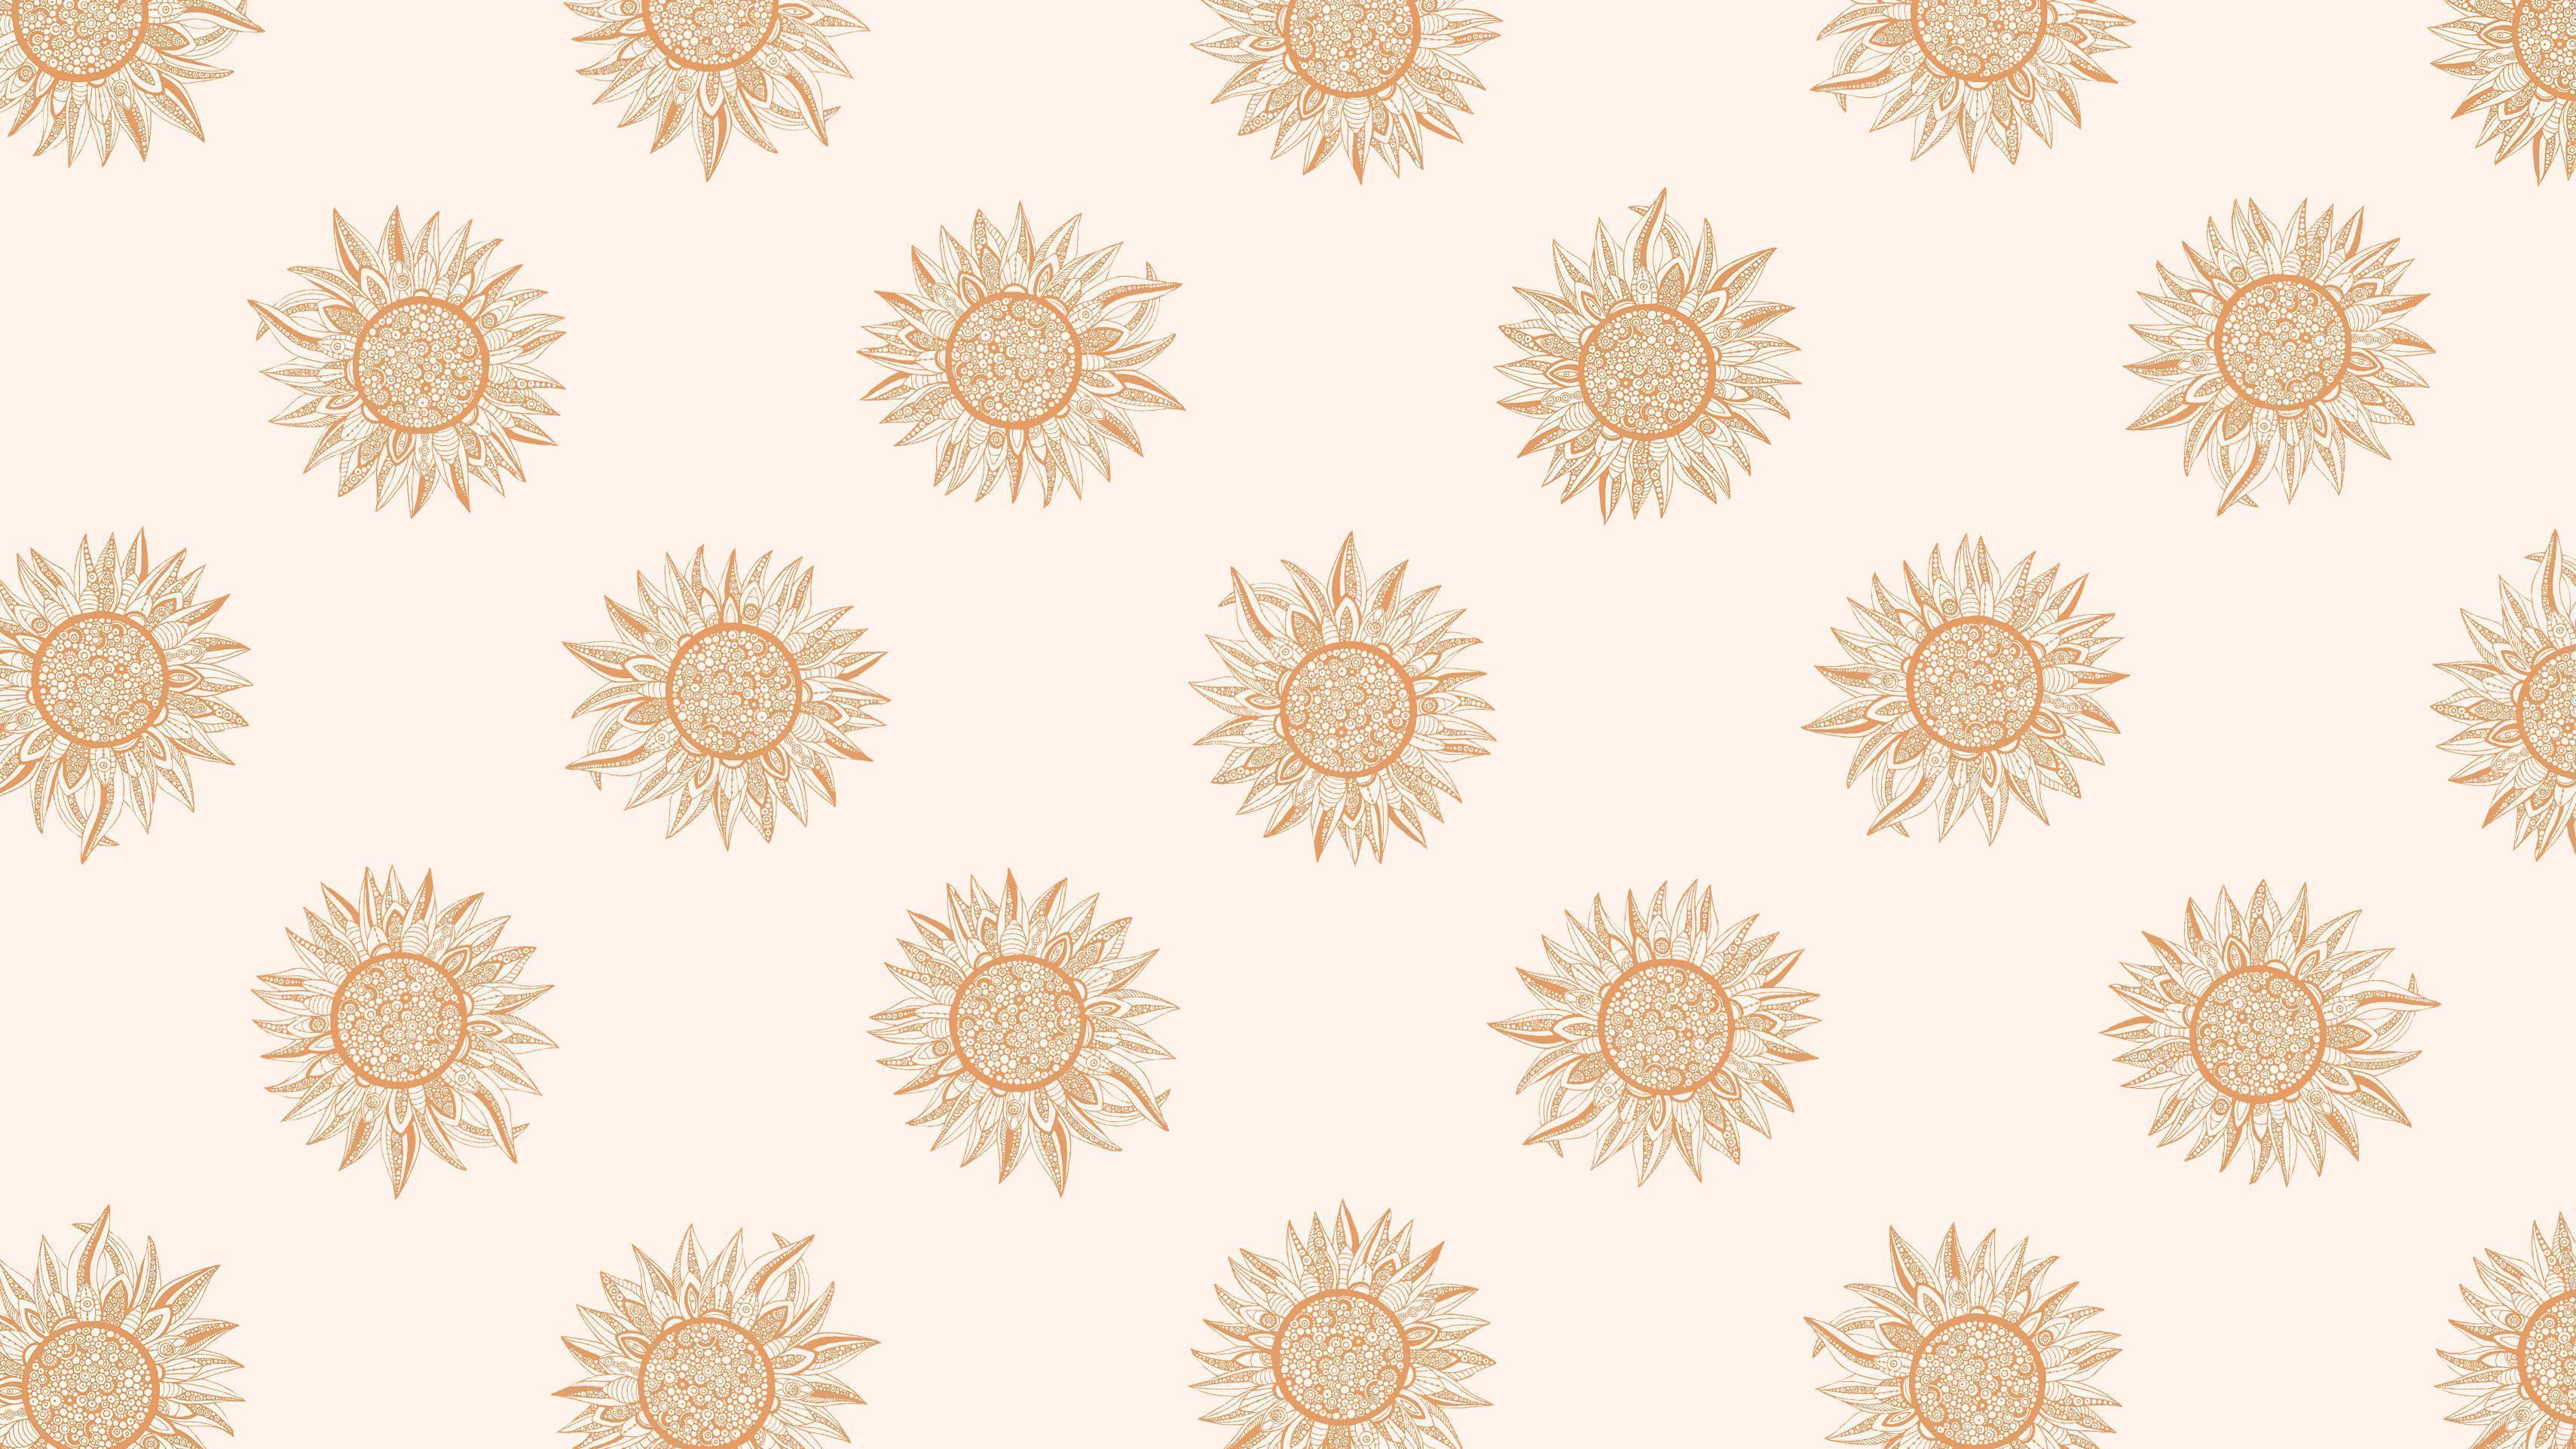 A pattern of sunflowers on beige background - Chromebook, sun, gold, cute